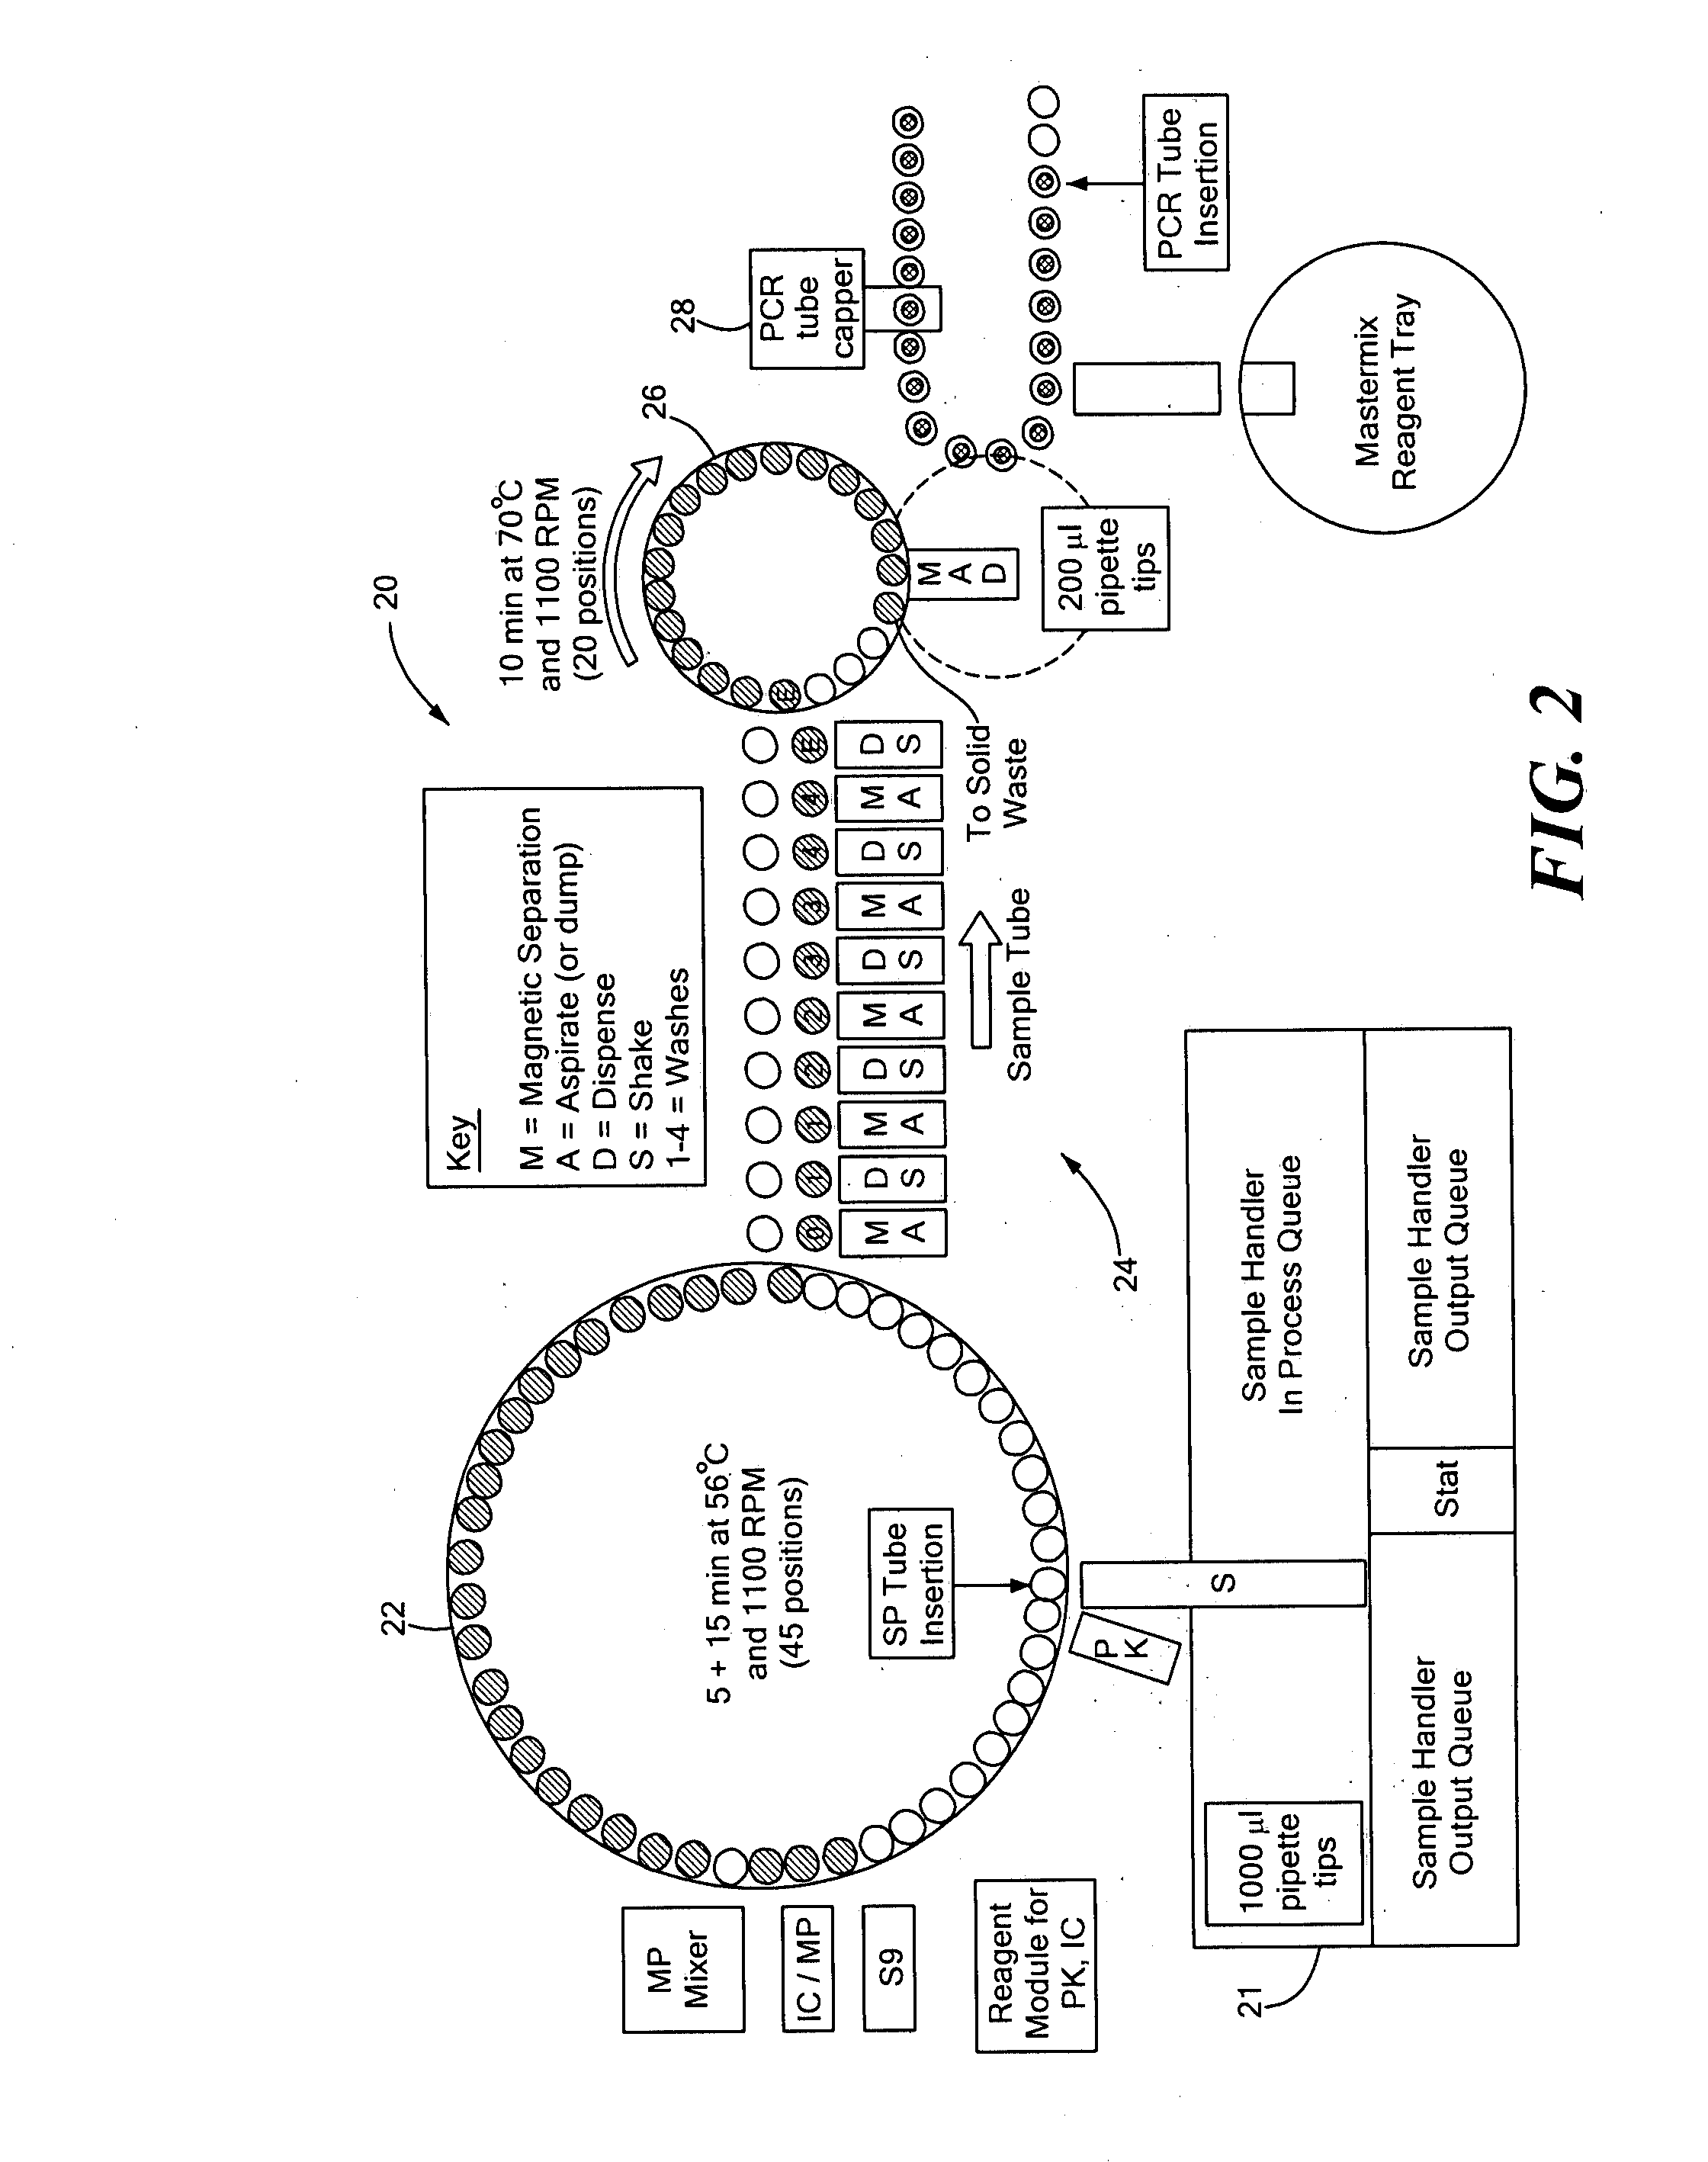 Random access system and method for polymerase chain reaction testing